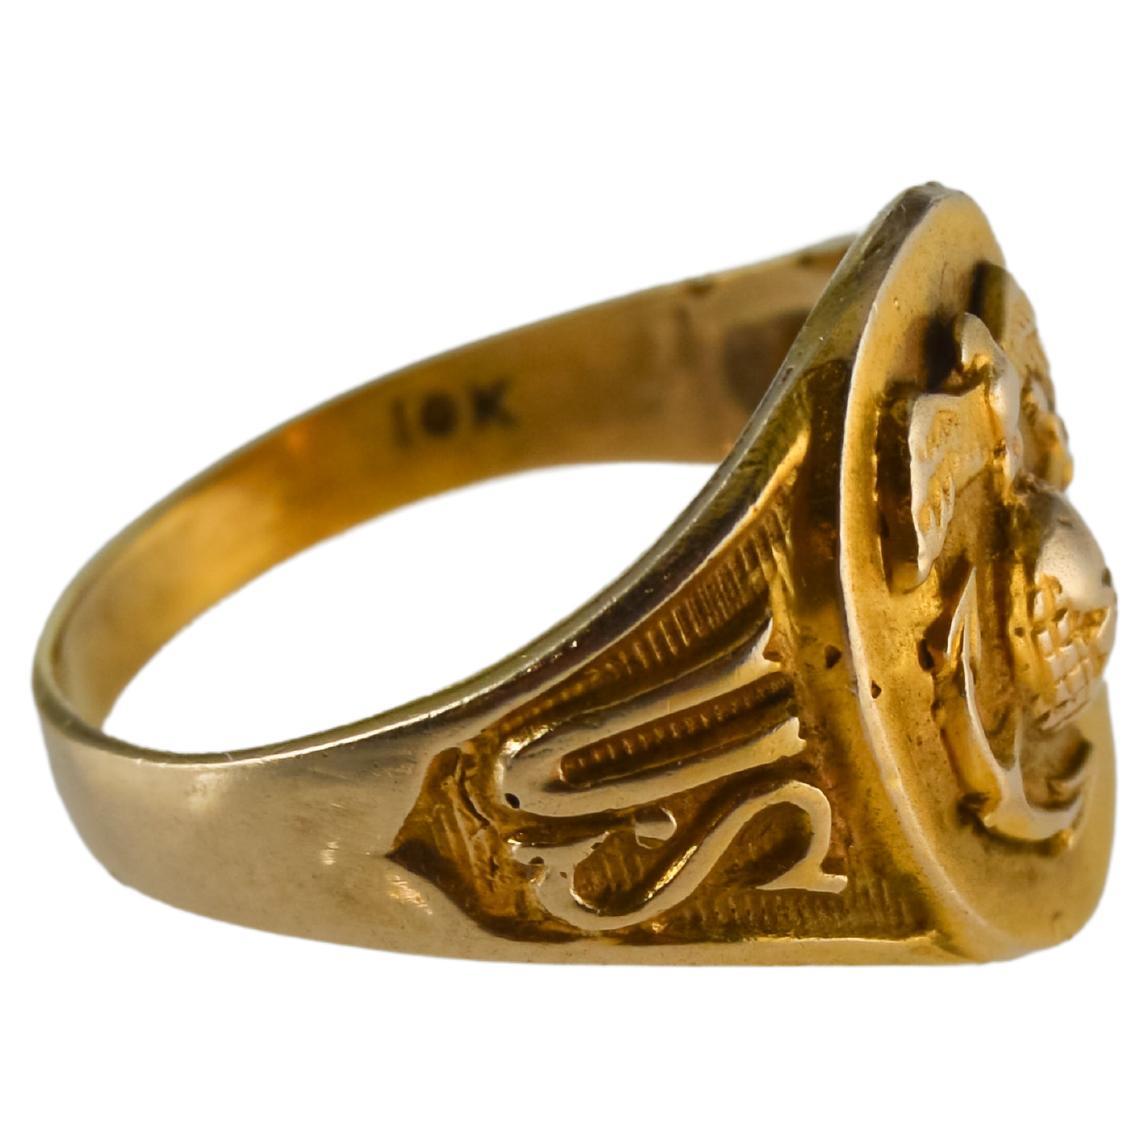 STYLE / REFERENCE: Art Deco Signet Ring 
METAL / MATERIAL: 10Kt. Solid Yellow Gold 
CIRCA / YEAR: 1930's
SIZE:  6 1/2

This great looking U.S. Naval Academy ring is die struck and is done in Solid 10Kt. Richly embossed it is very unique and can